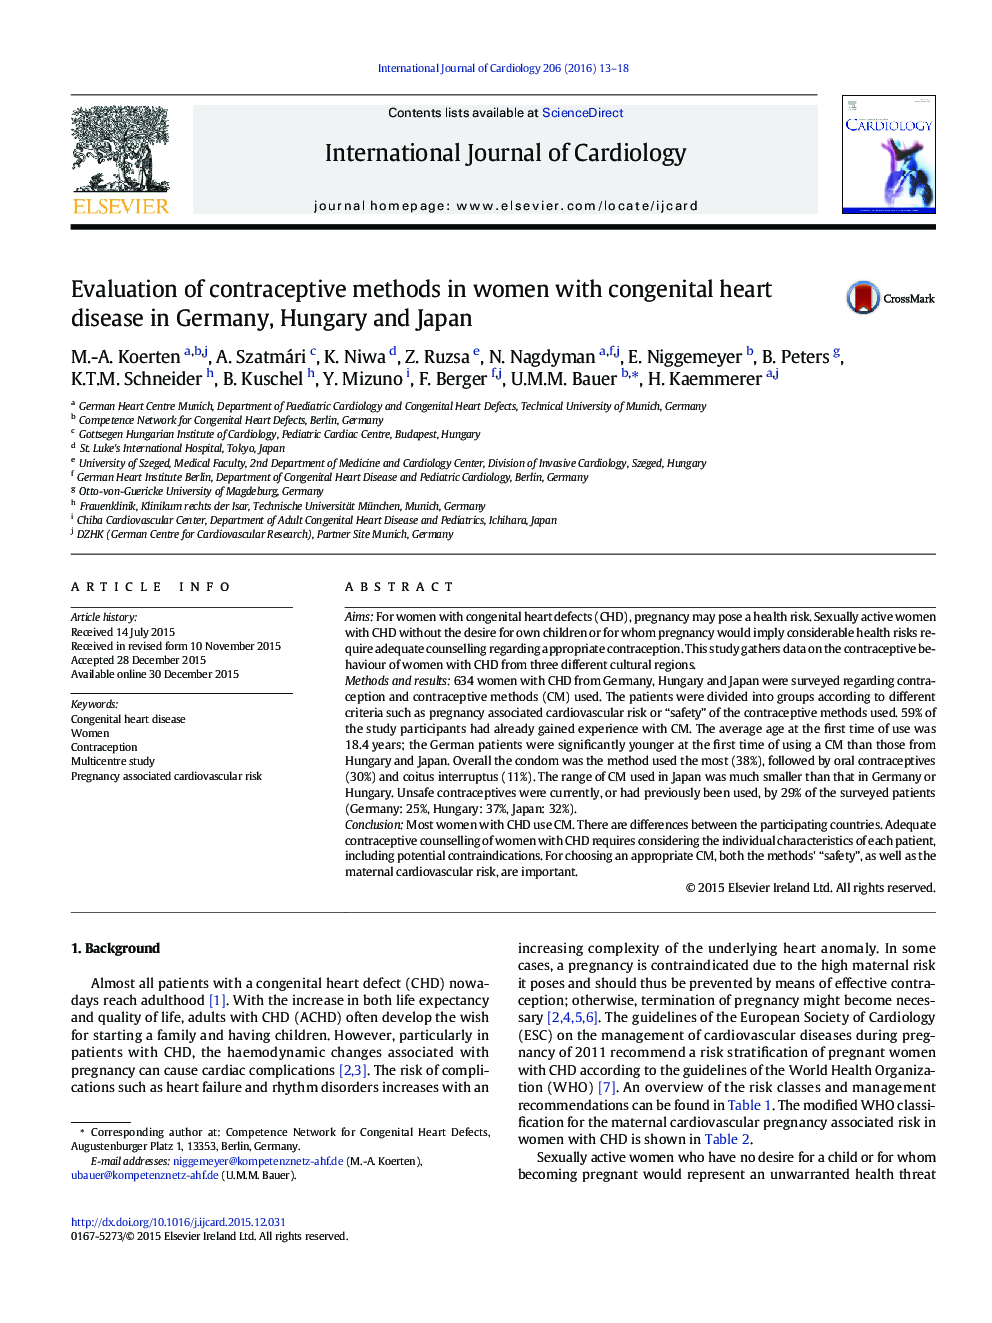 Evaluation of contraceptive methods in women with congenital heart disease in Germany, Hungary and Japan